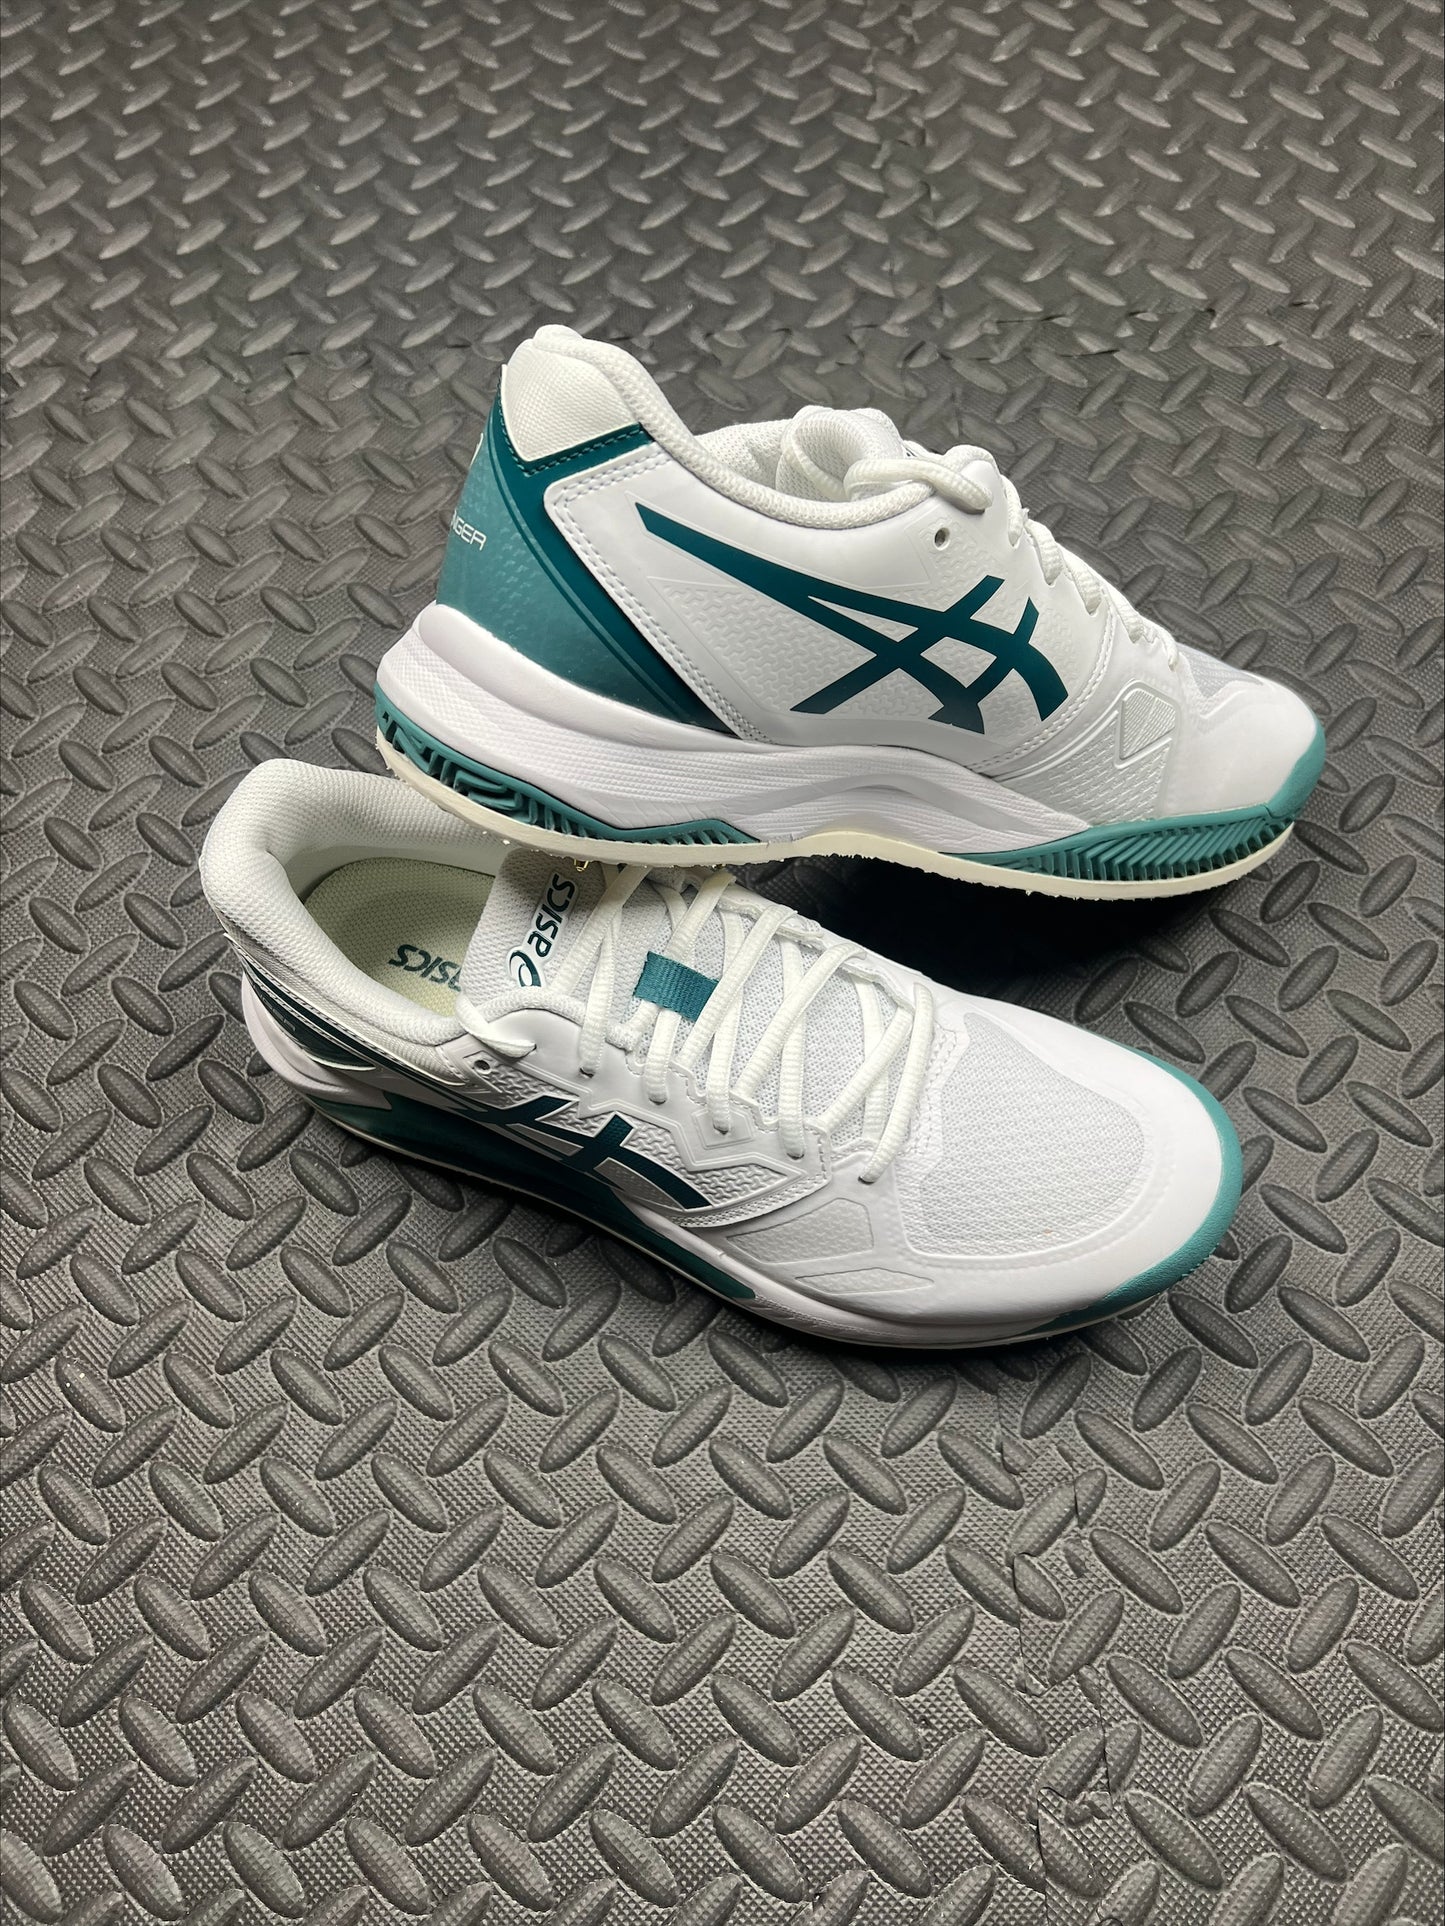 Asics Gel Challenger 13 Spiked Trainers